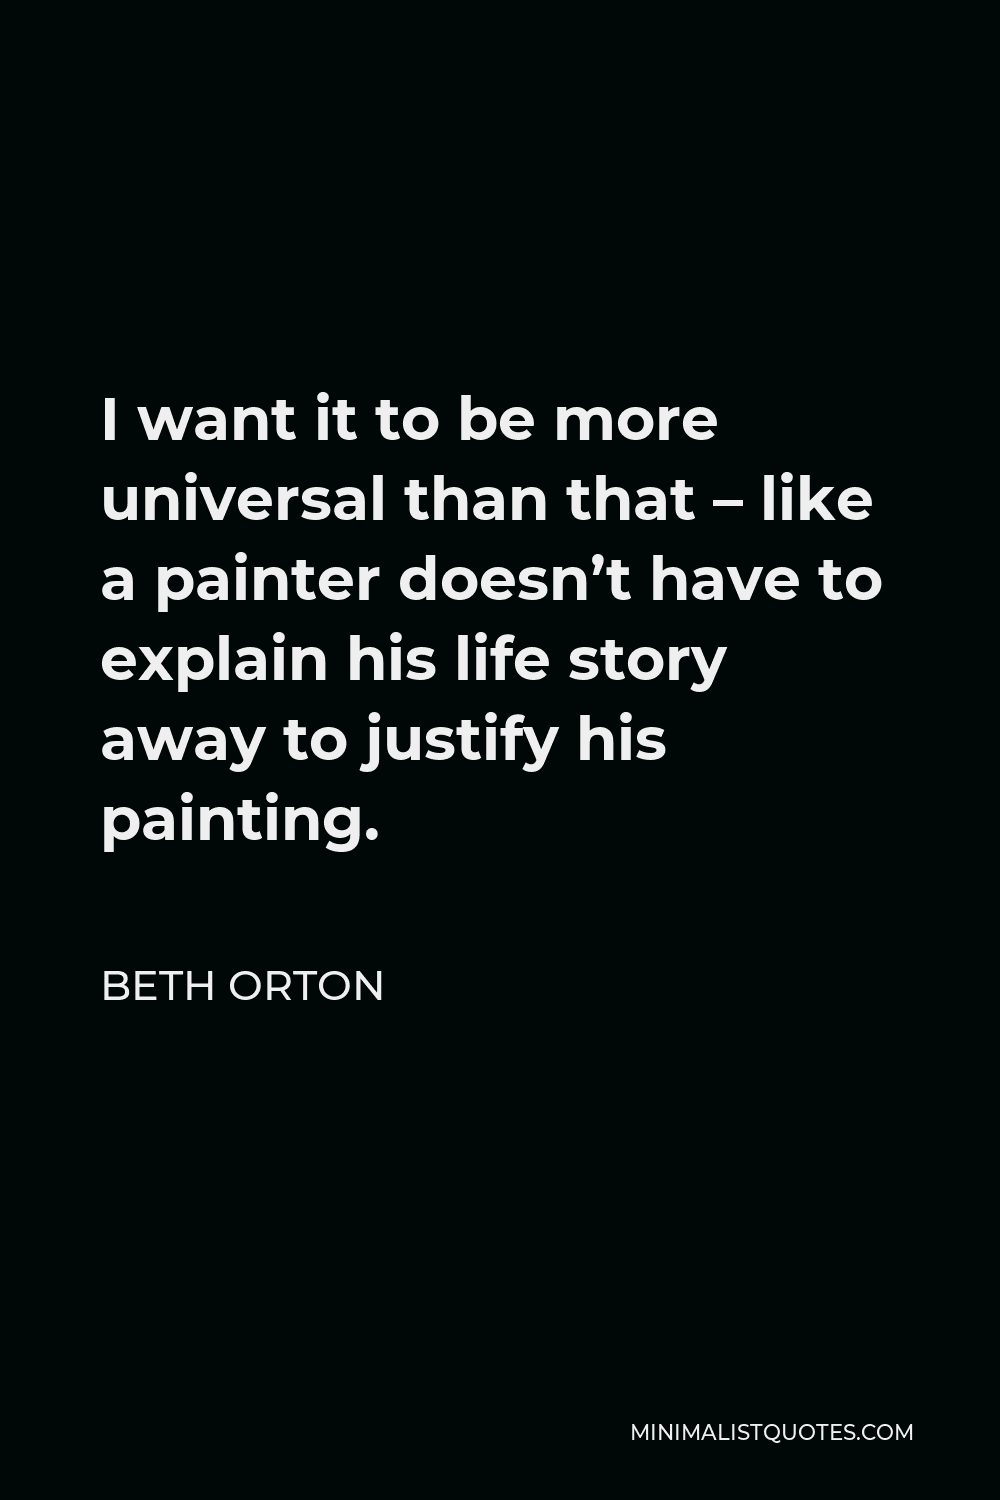 Beth Orton Quote - I want it to be more universal than that – like a painter doesn’t have to explain his life story away to justify his painting.